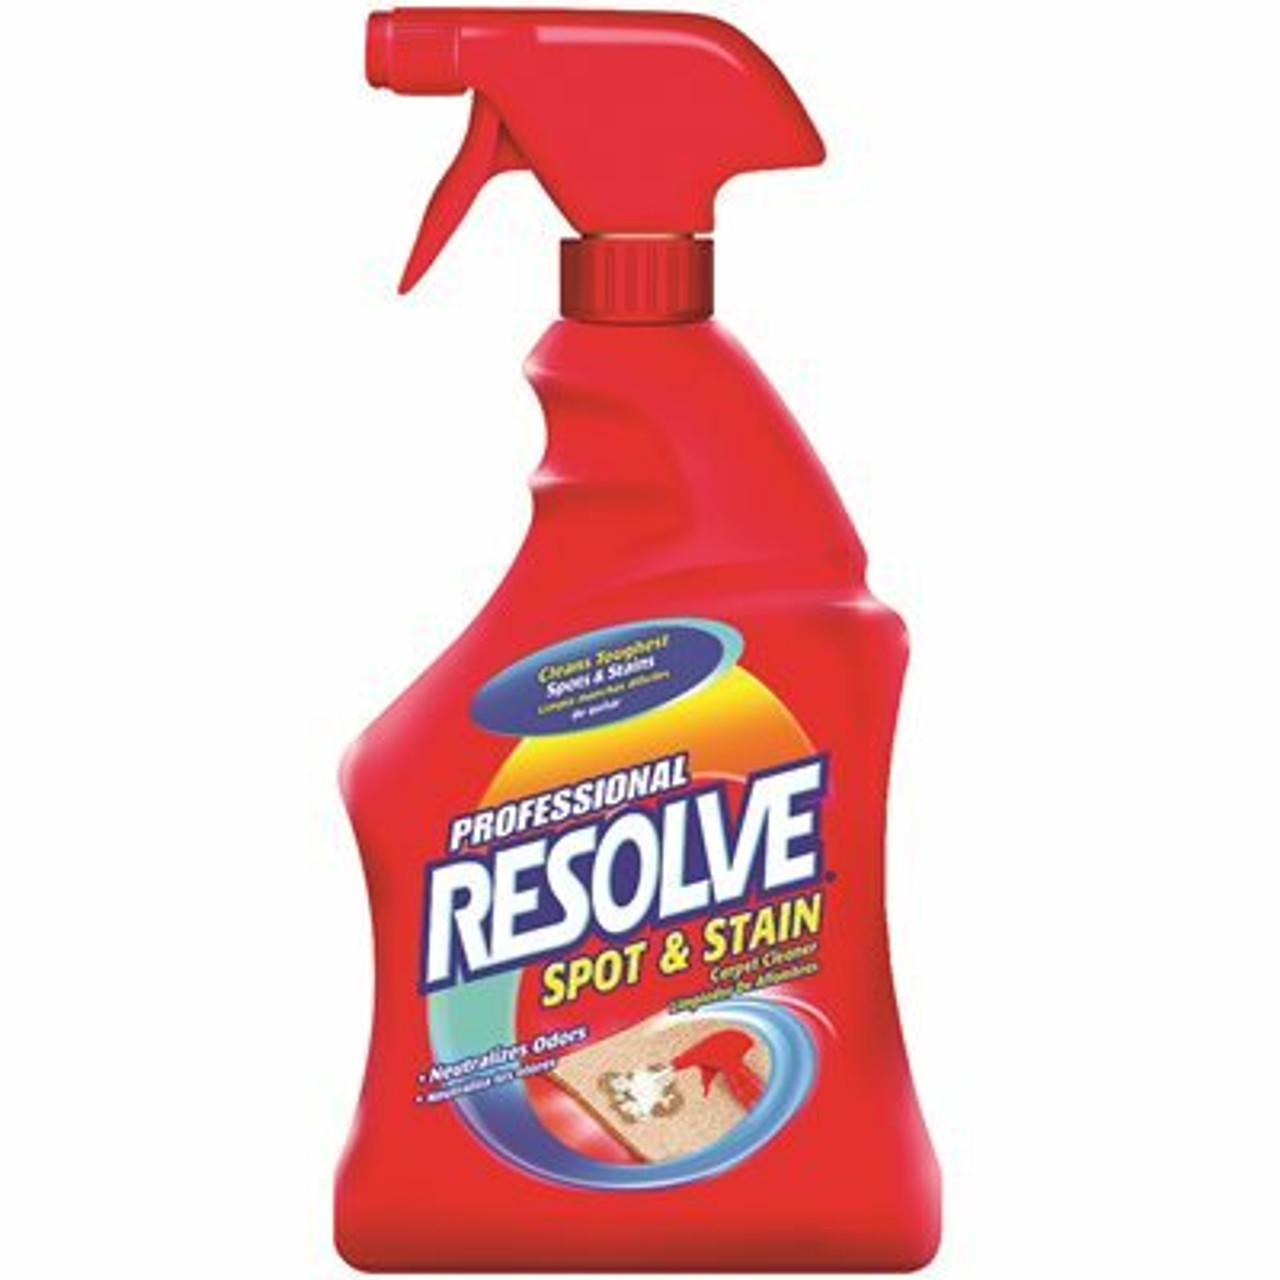 Professional Resolve Professional Resolve Spot And Stain Remover, 32 Oz.